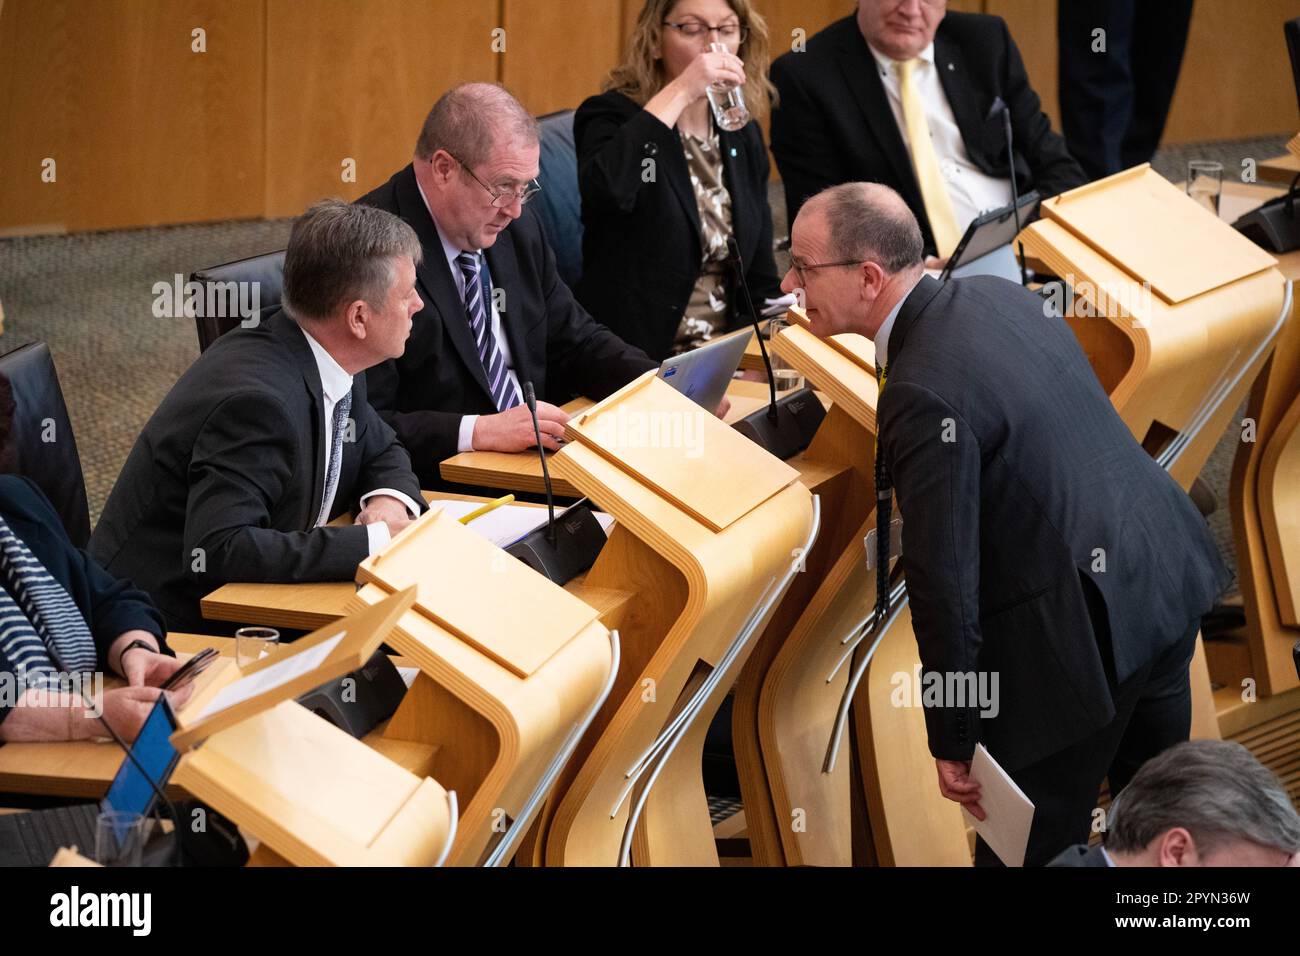 Edinburgh, Scotland, UK. 4th May, 2023. PICTURED: (L) Keith Brown MSP, Former Scottish Cabinet Minister for Justice speaking with (R) Jim Fairlie MSP for Perthshire South and Kinross-shire of the Scottish National Party, speaking to each other whilst the First Minister is standing up sneering a question. Scenes inside Holyrood showing the corridor and chamber views of the MSPs at the weekly session of First Ministers Questions (FMQs). Credit: Colin D Fisher/CDFIMAGES.COM Credit: Colin Fisher/Alamy Live News Stock Photo